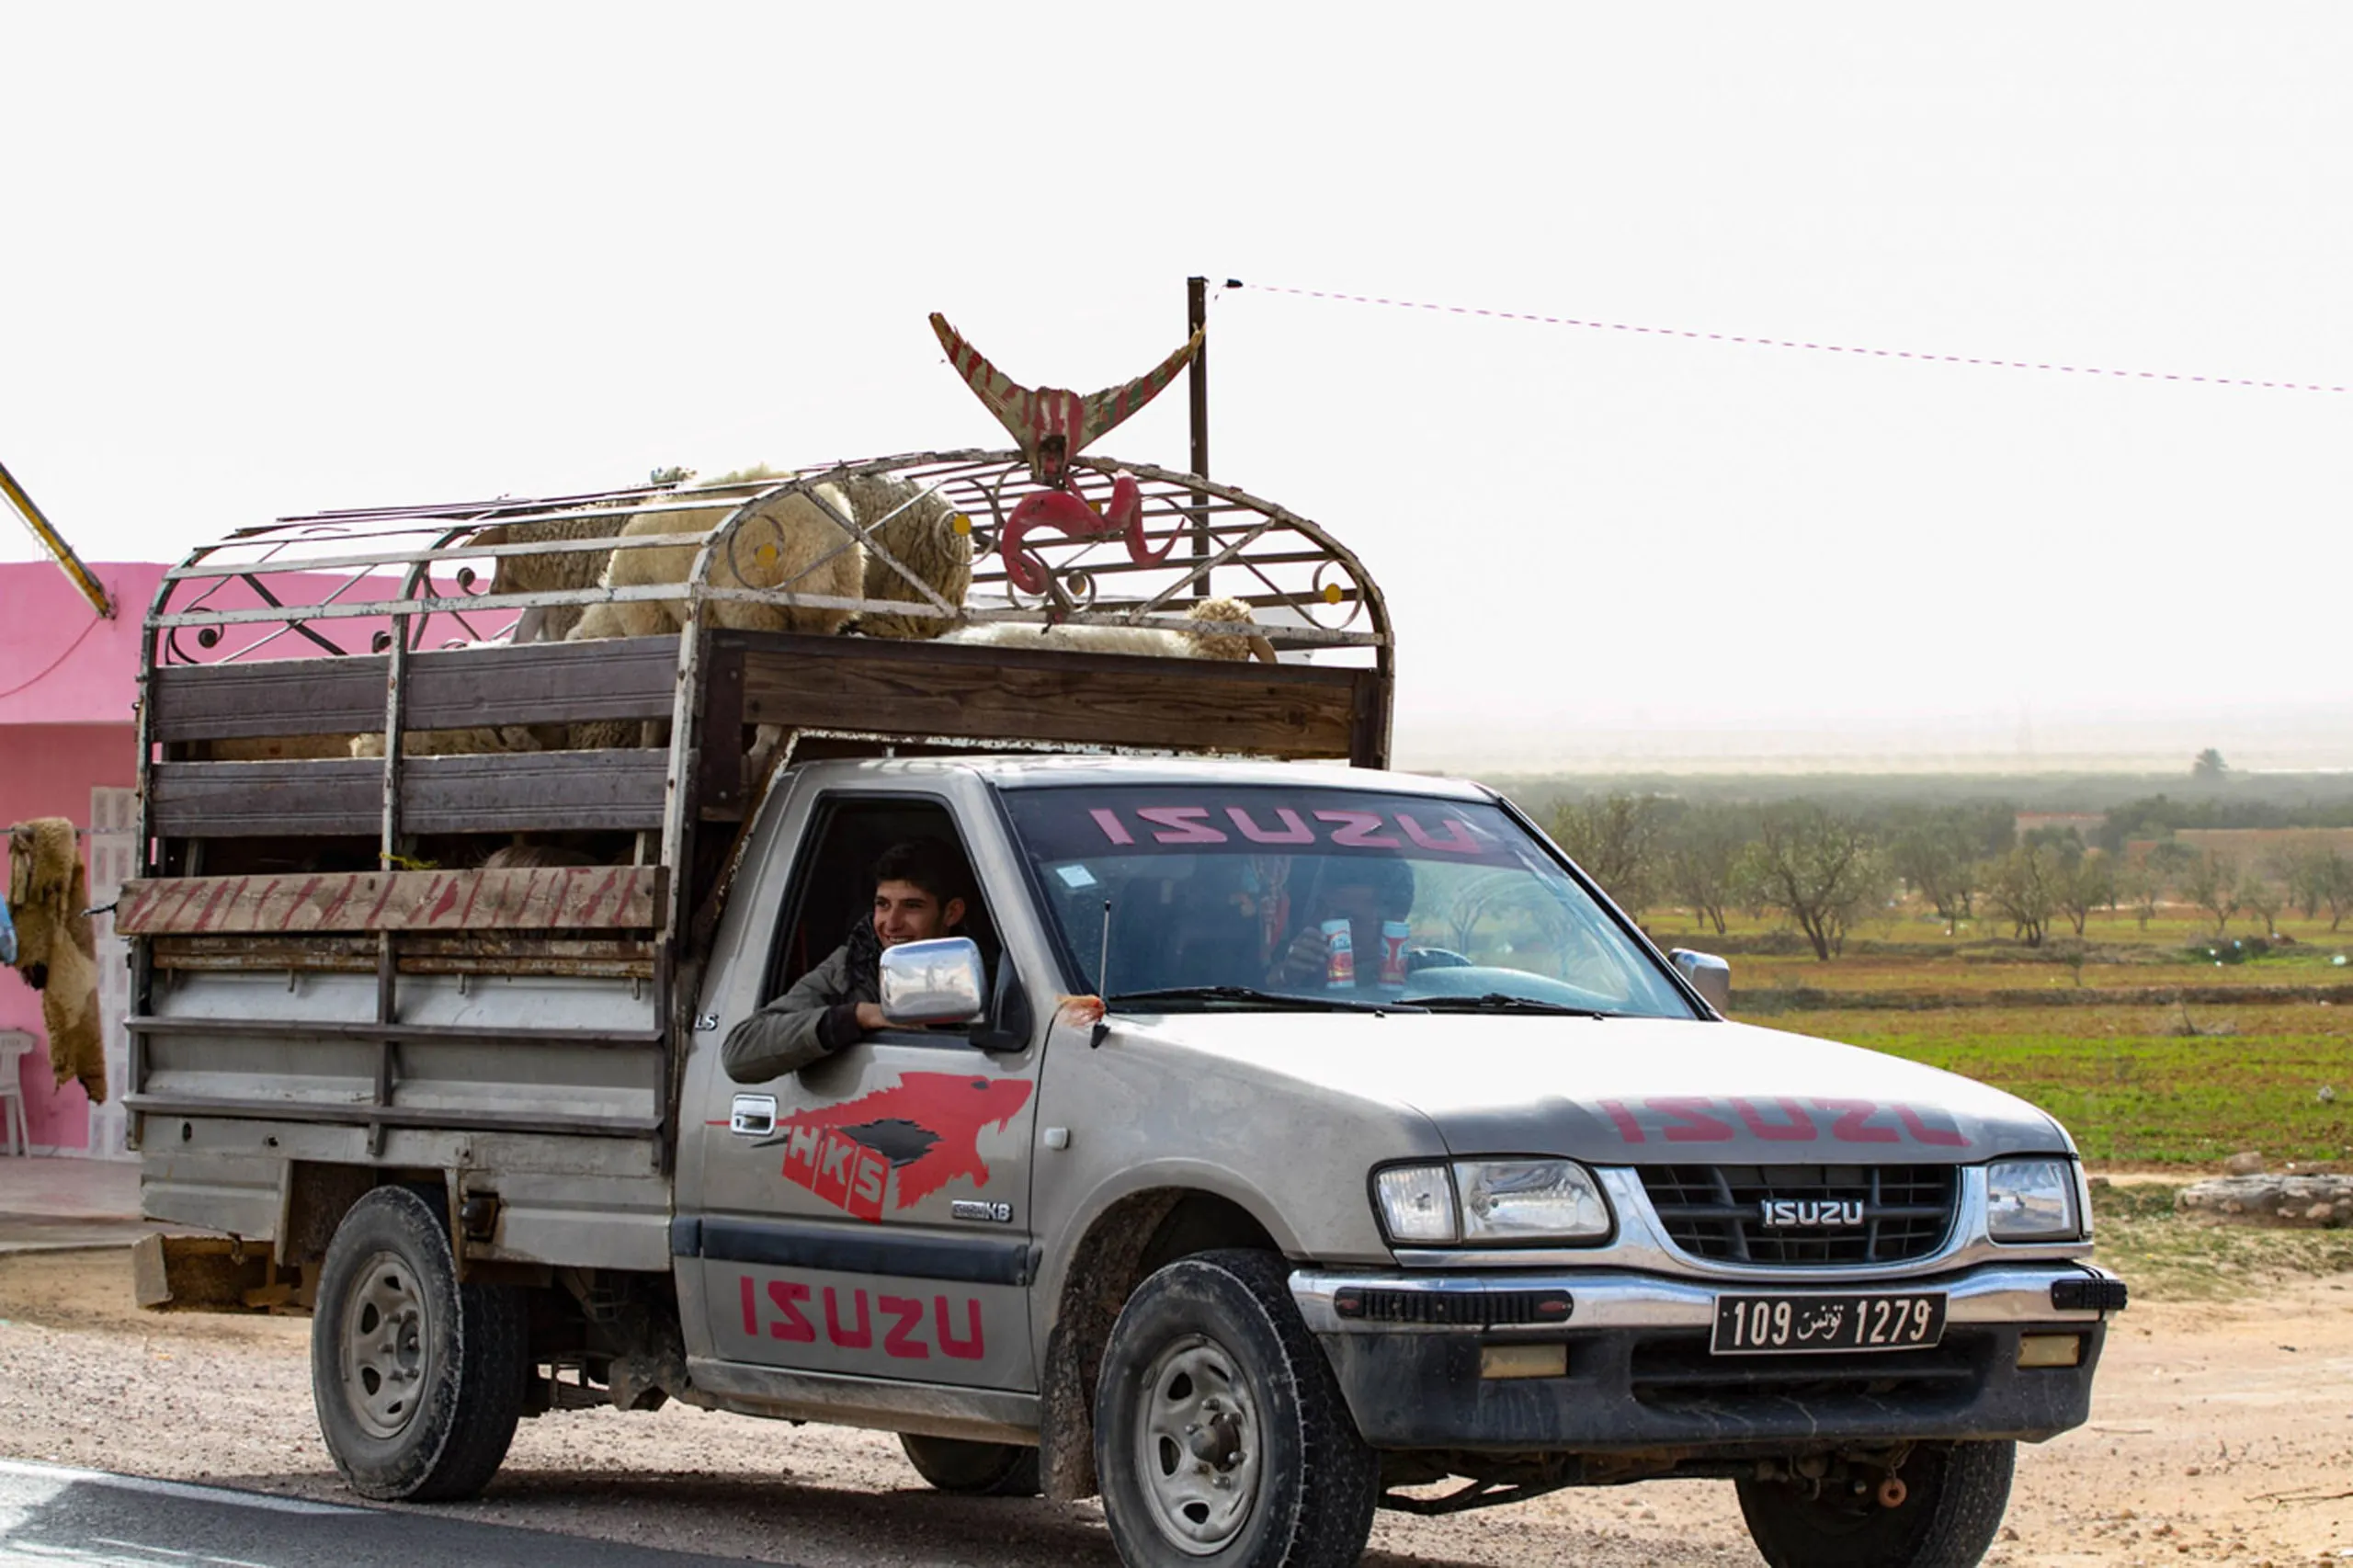 Sheep being transported in a truck along the road in Tunisia.